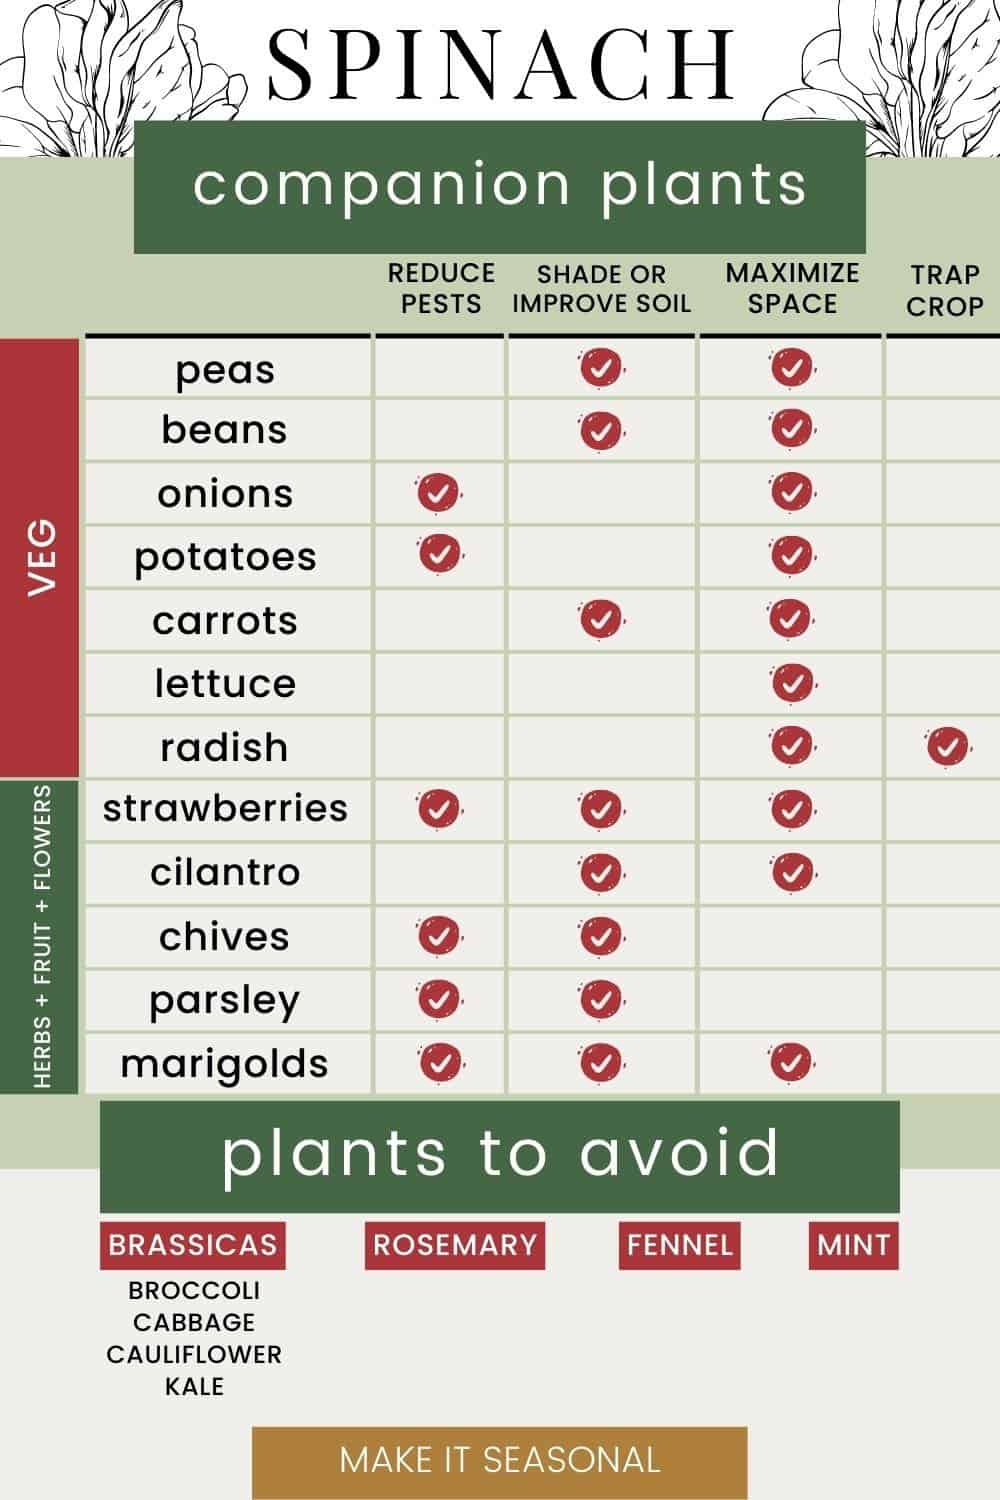 Spinach companion planting chart with the best vegetables, herbs, flowers, and fruit to plant with spinach and plants to avoid